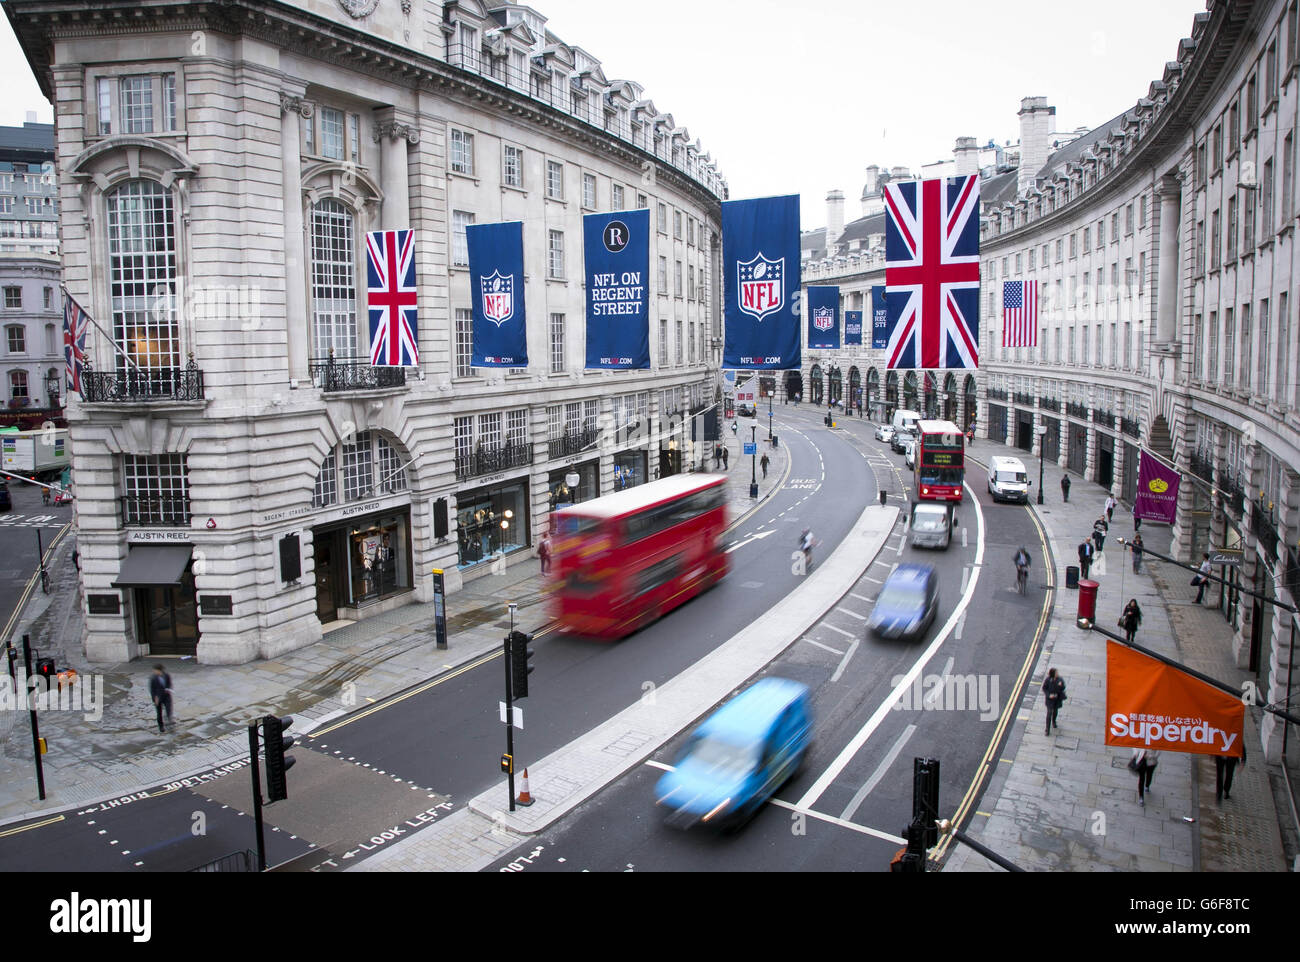 American NFL (National Football League) flags are displayed above Regent Street, central London, in preparation for NFL on Regent Street - the traffic free event on Saturday 28th September ahead of the NFL's forthcoming International Series in London. Stock Photo